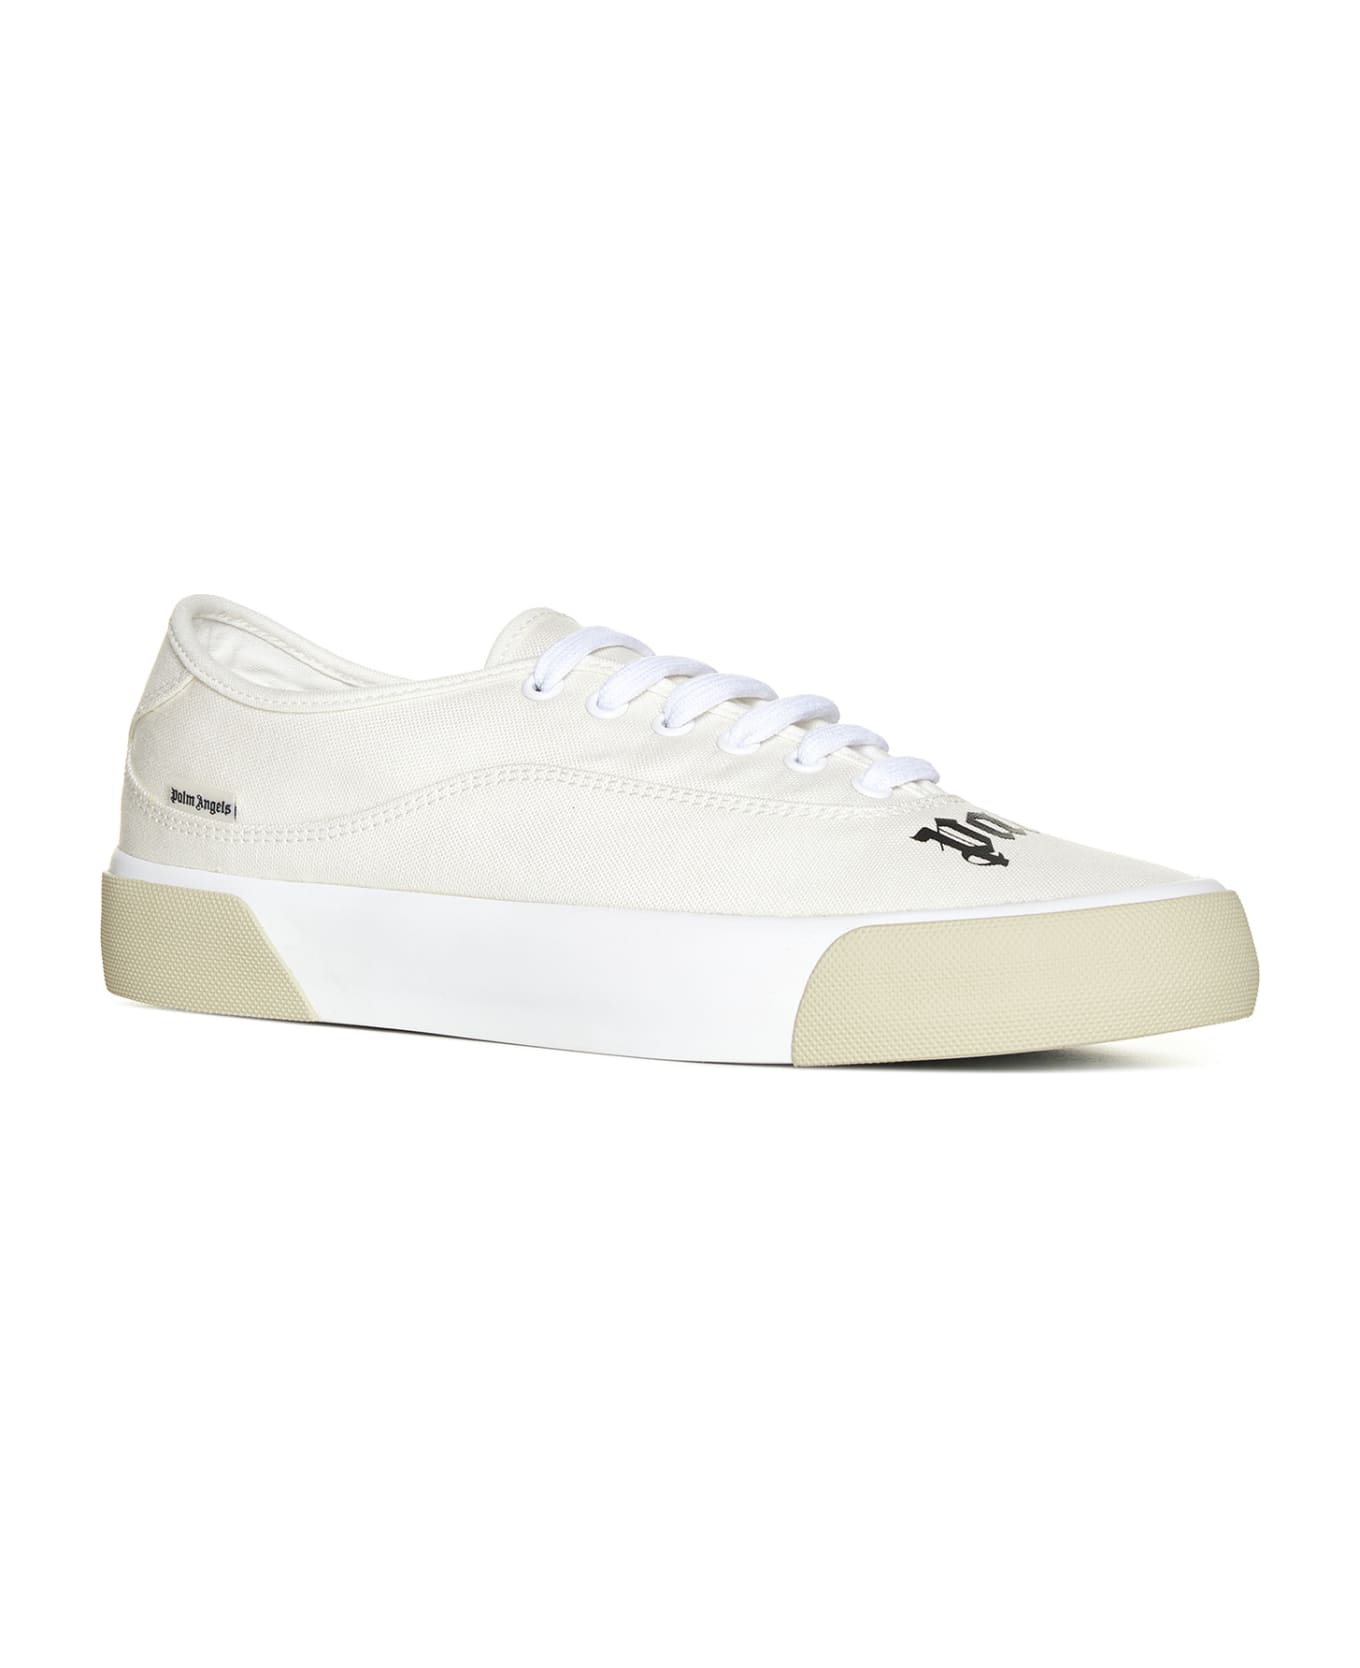 Palm Angels Skater Low Sneakers - Cream white スニーカー